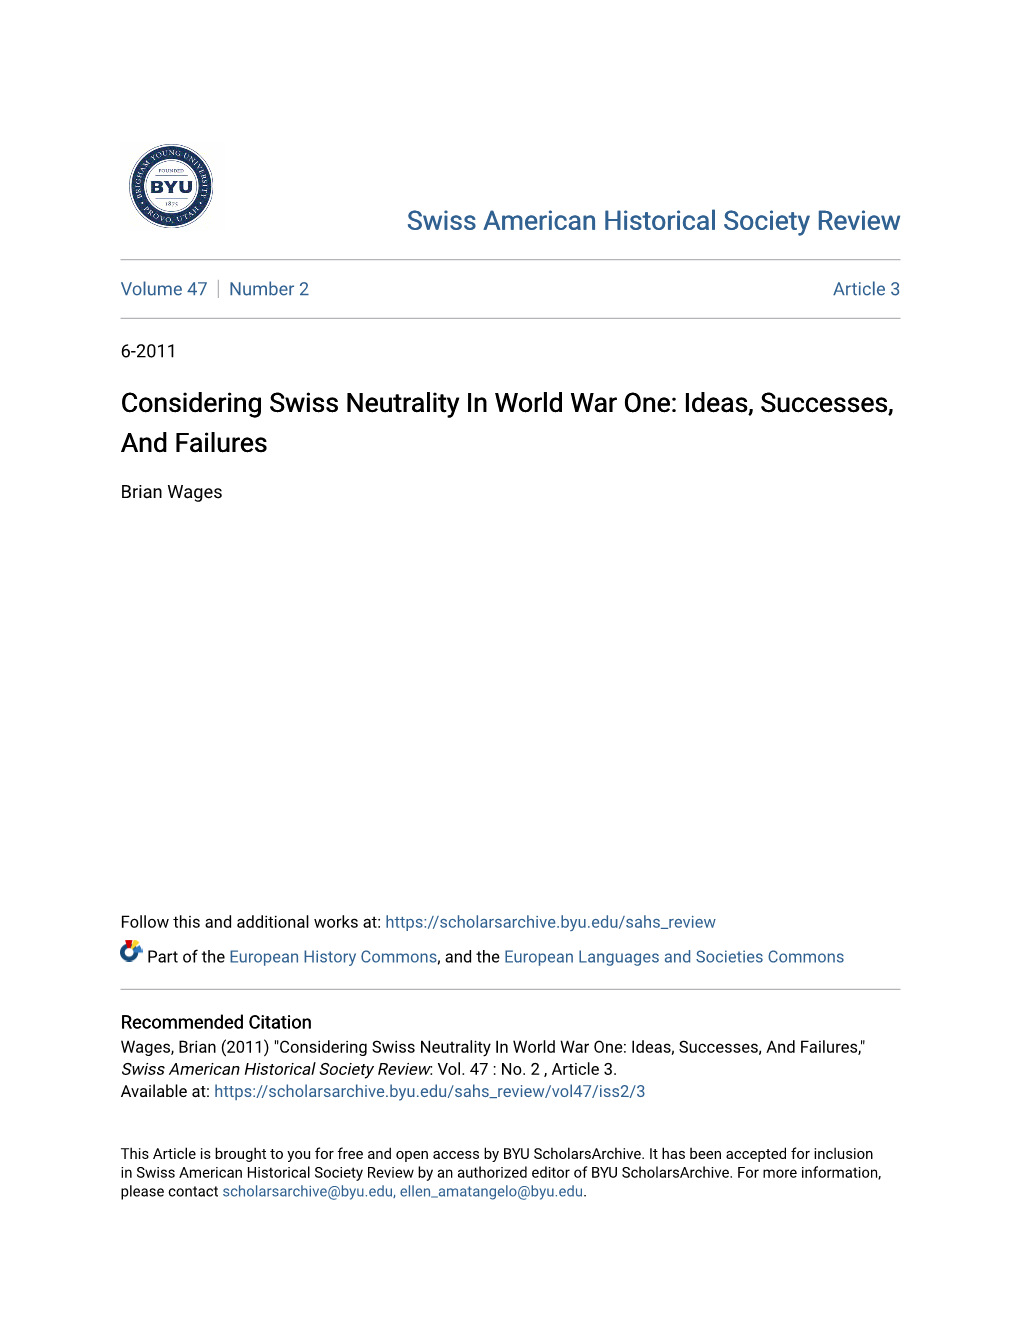 Considering Swiss Neutrality in World War One: Ideas, Successes, and Failures